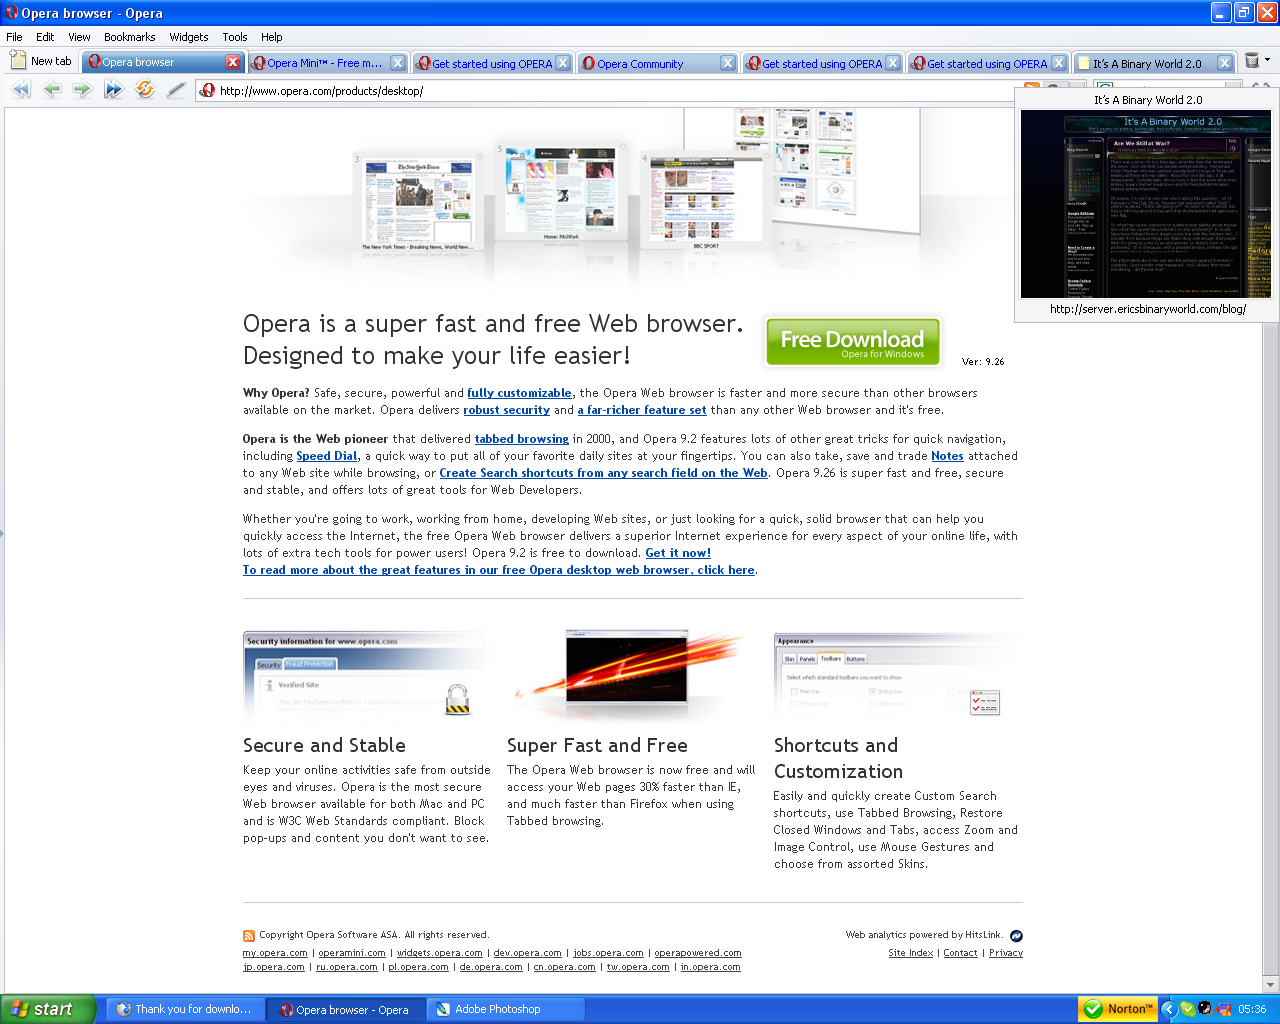 Another example of web preview